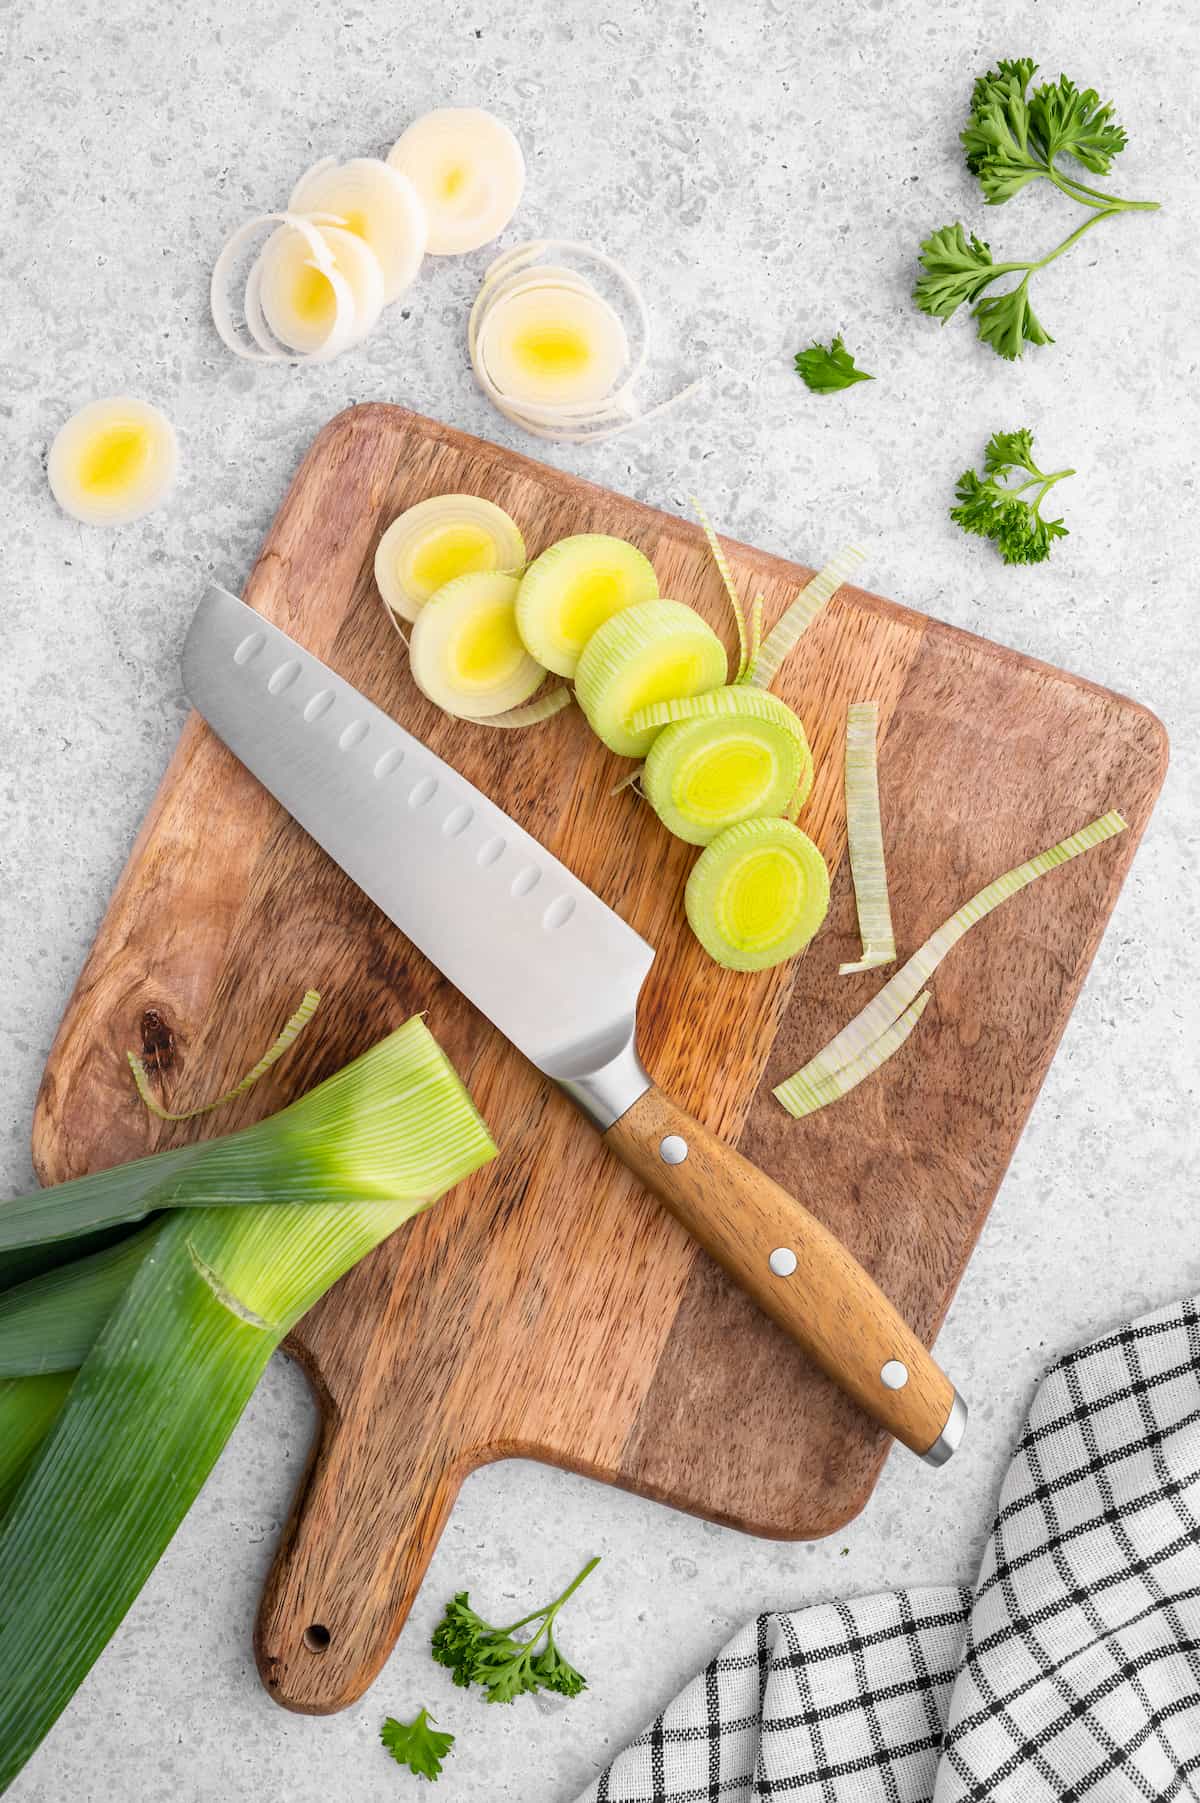 Chef's knife on a cutting board with vegetable ingredients. 